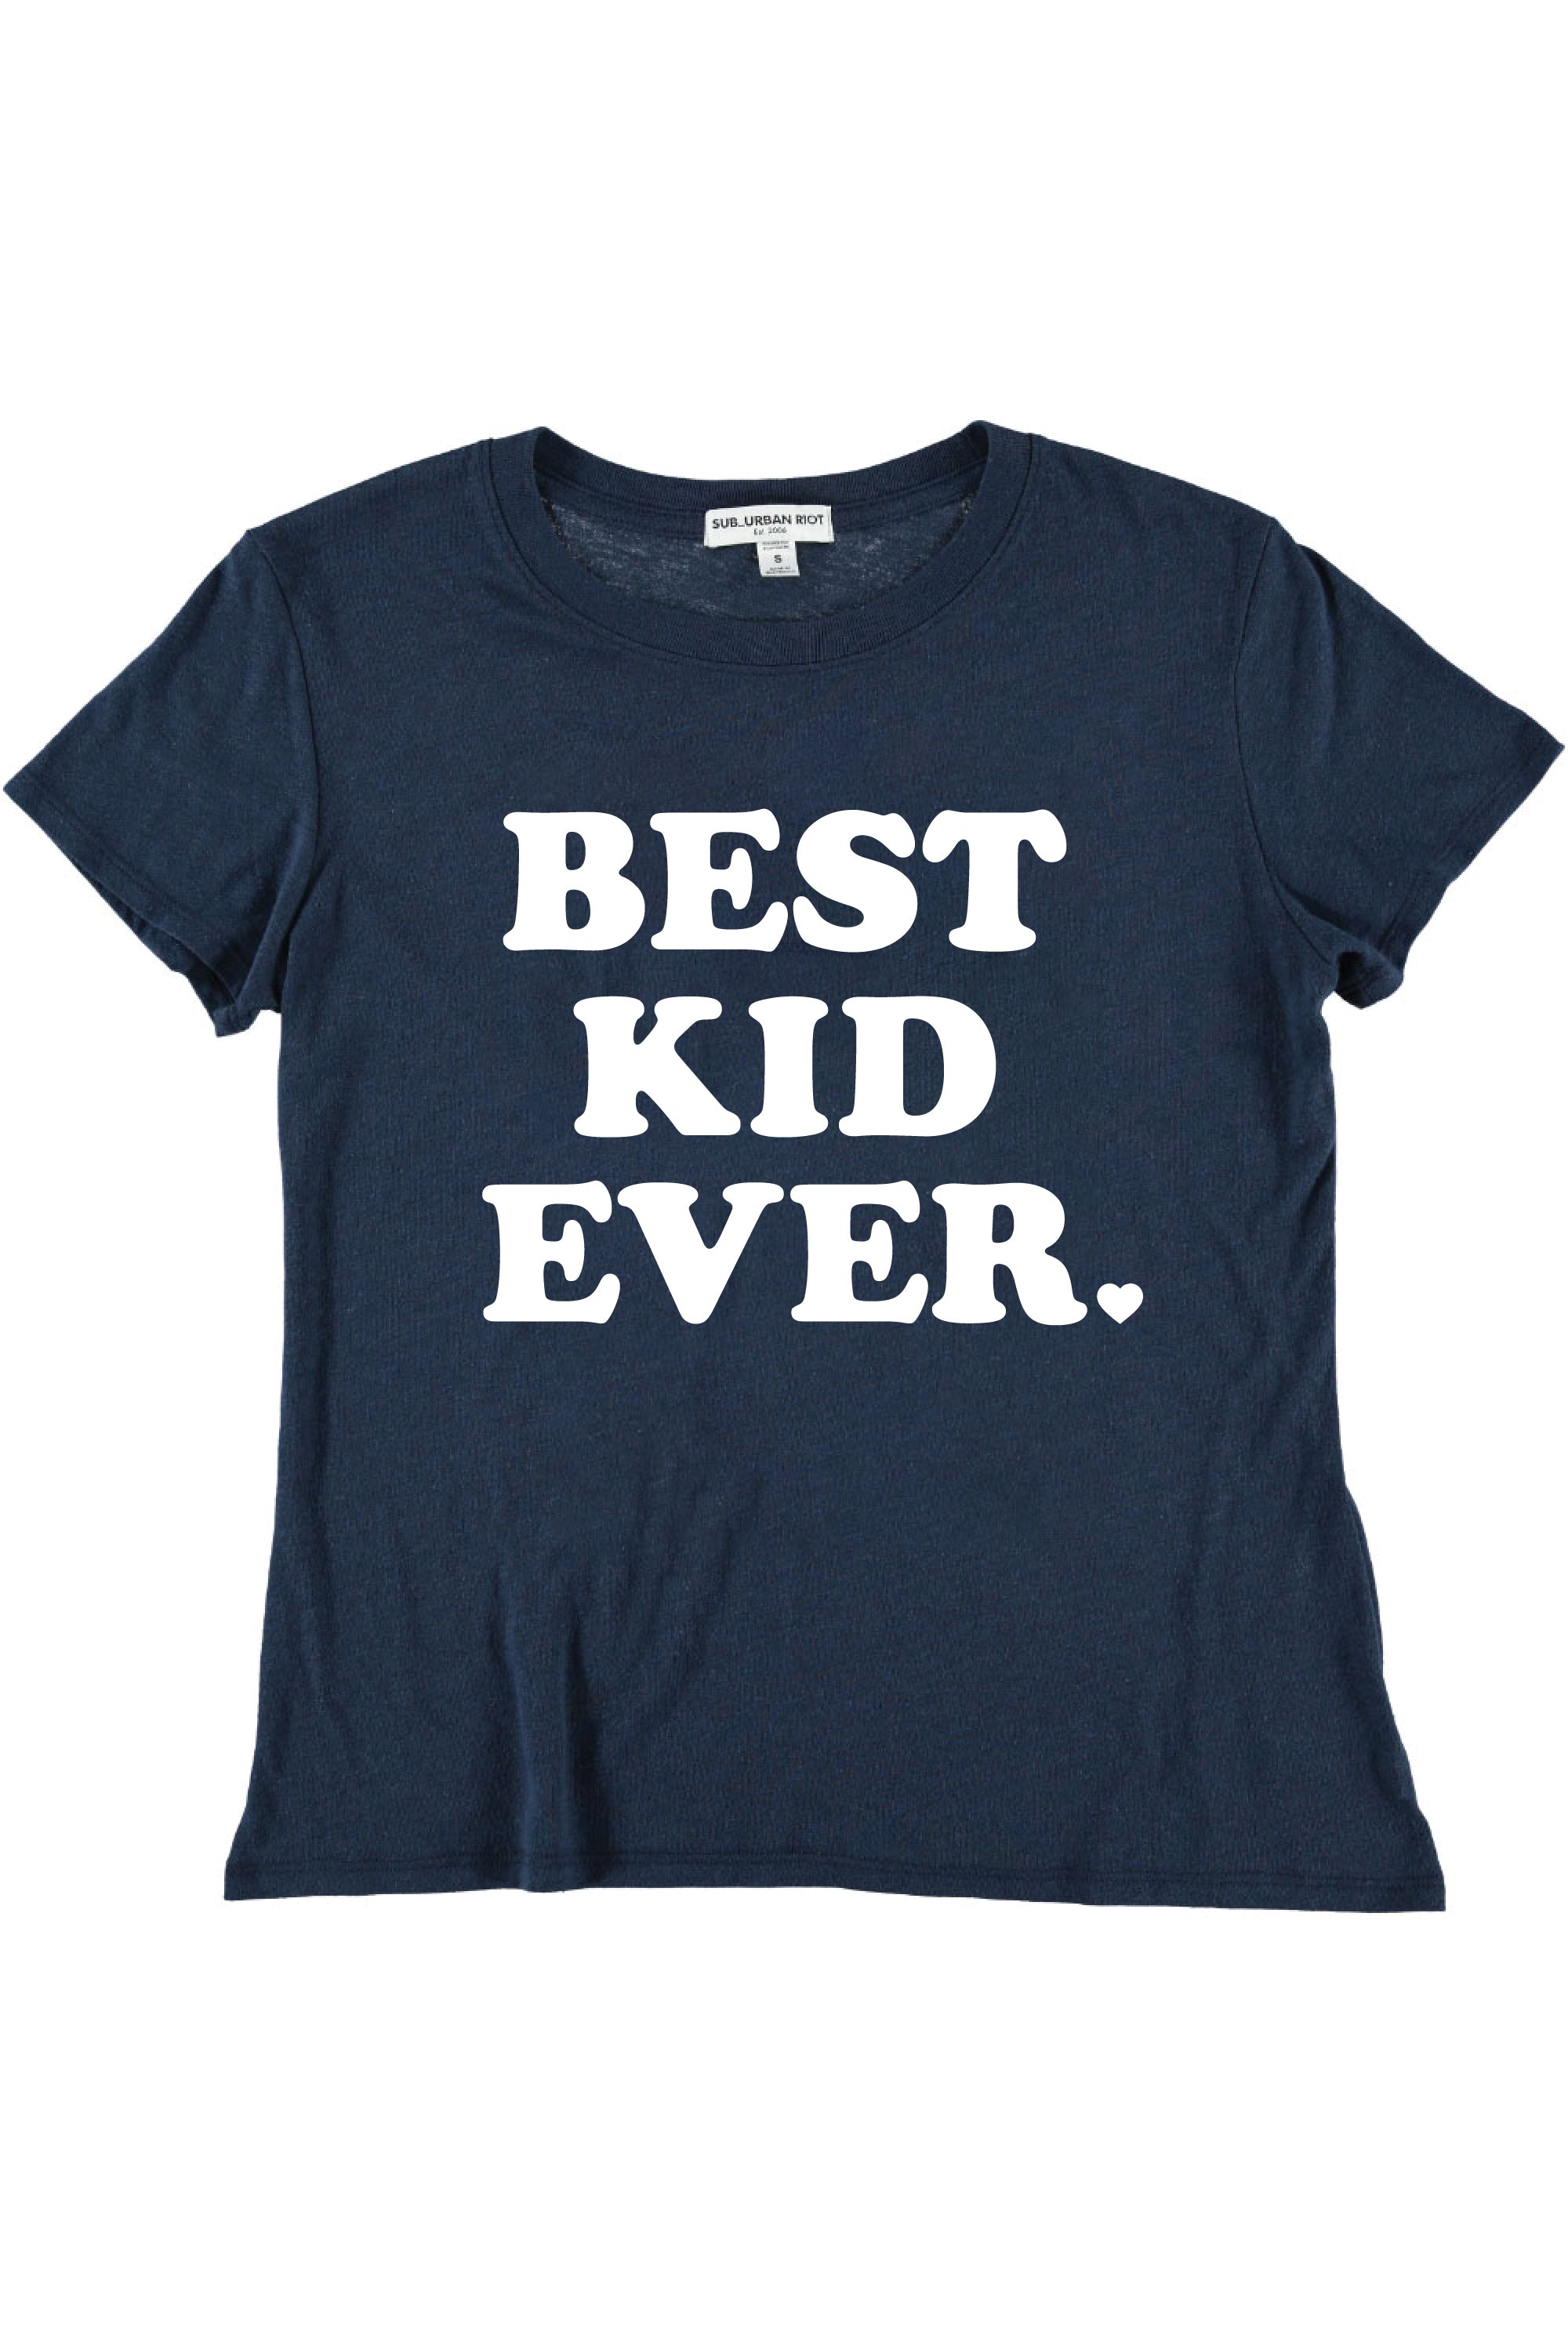 BEST KID EVER YOUTH SIZE LOOSE TEE